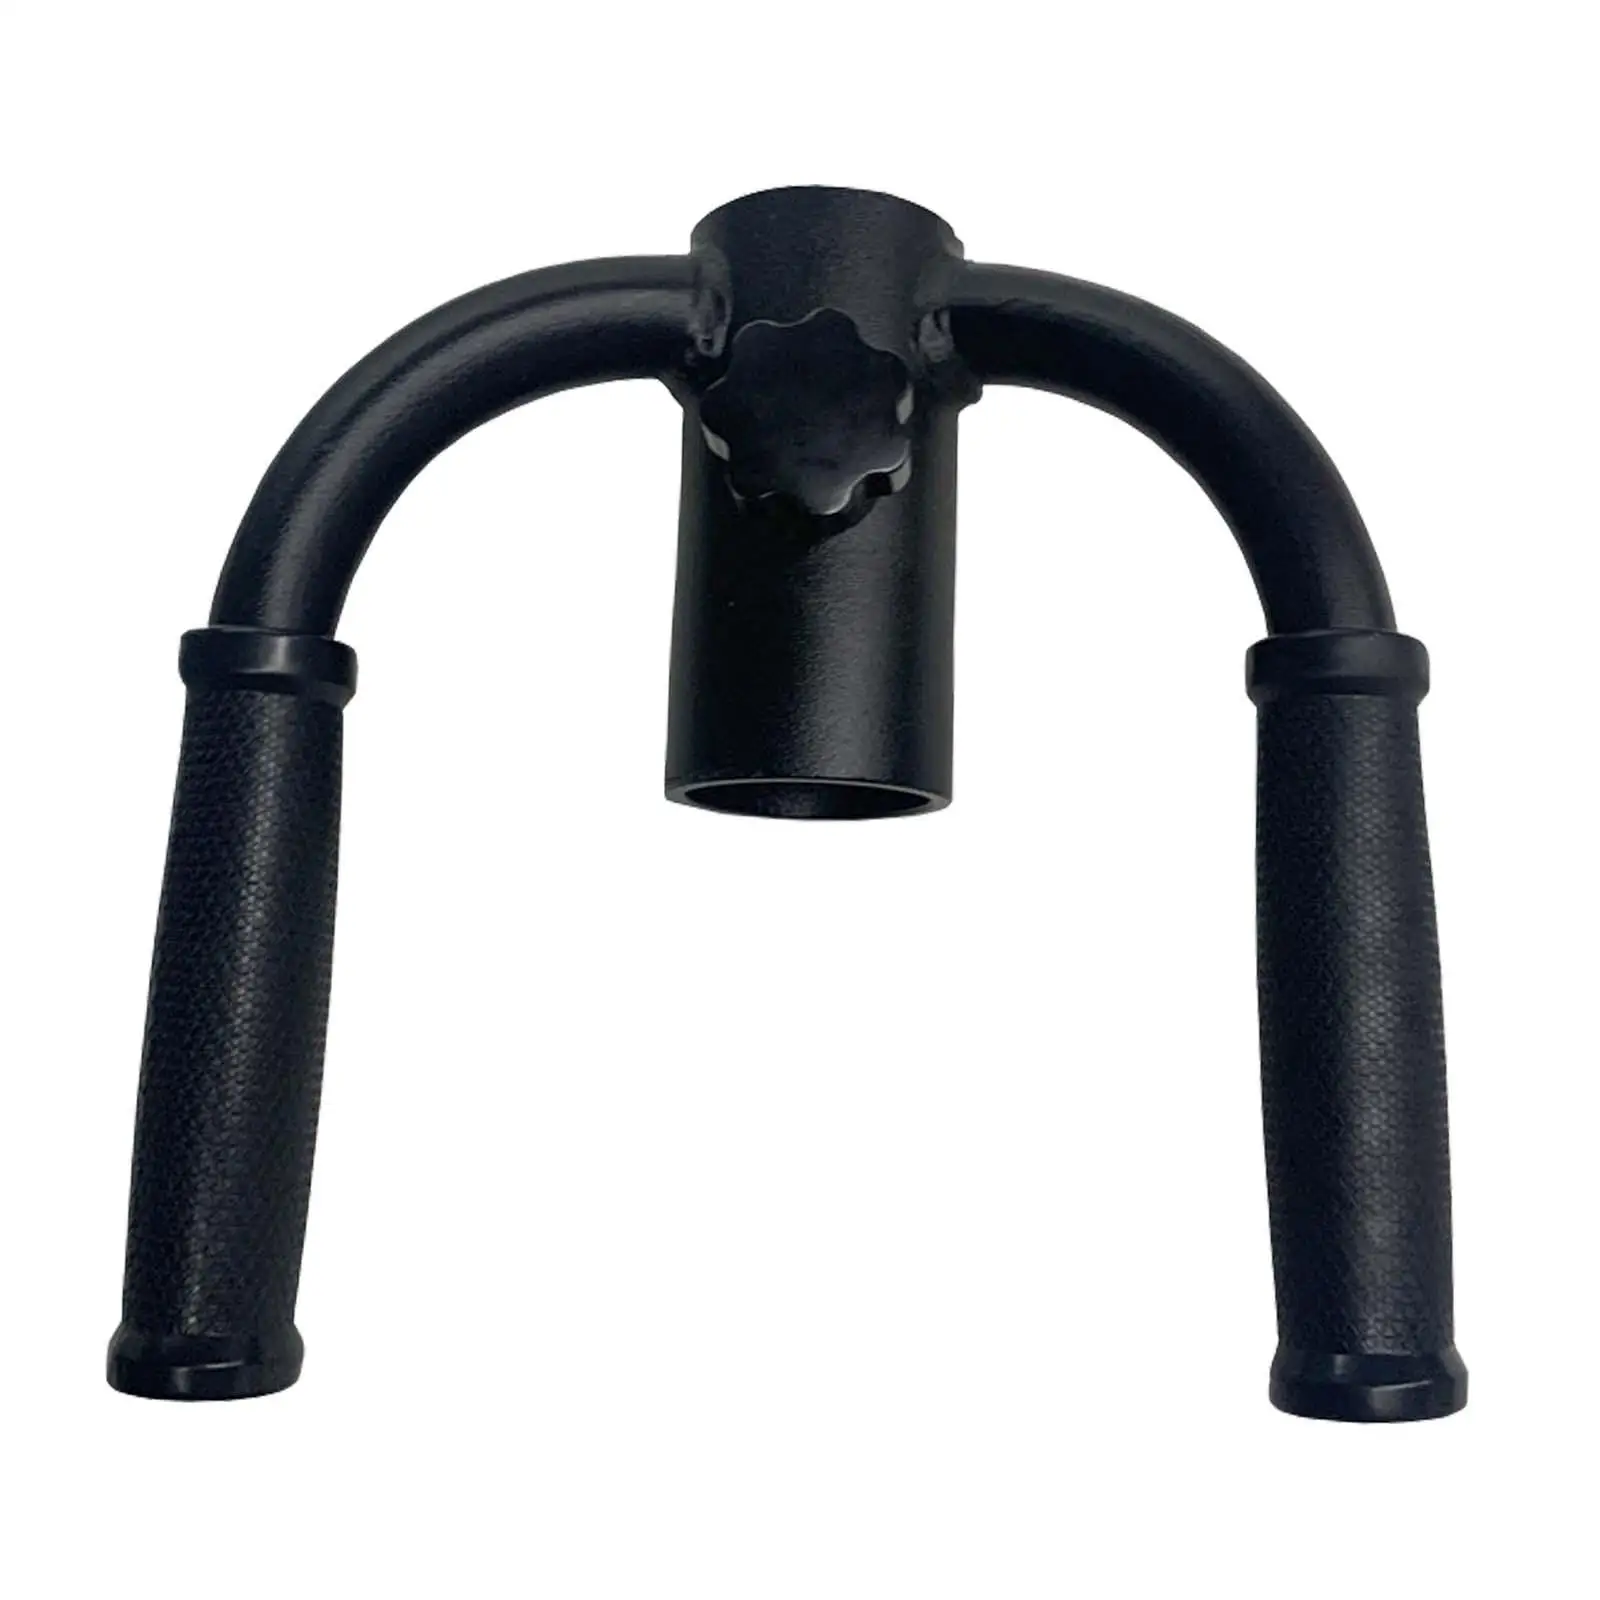 Landmine Handle Attachment for Barbell T Bar Row Attachment for Hamstrings Shoulders Strength Training Pull Ups Triceps